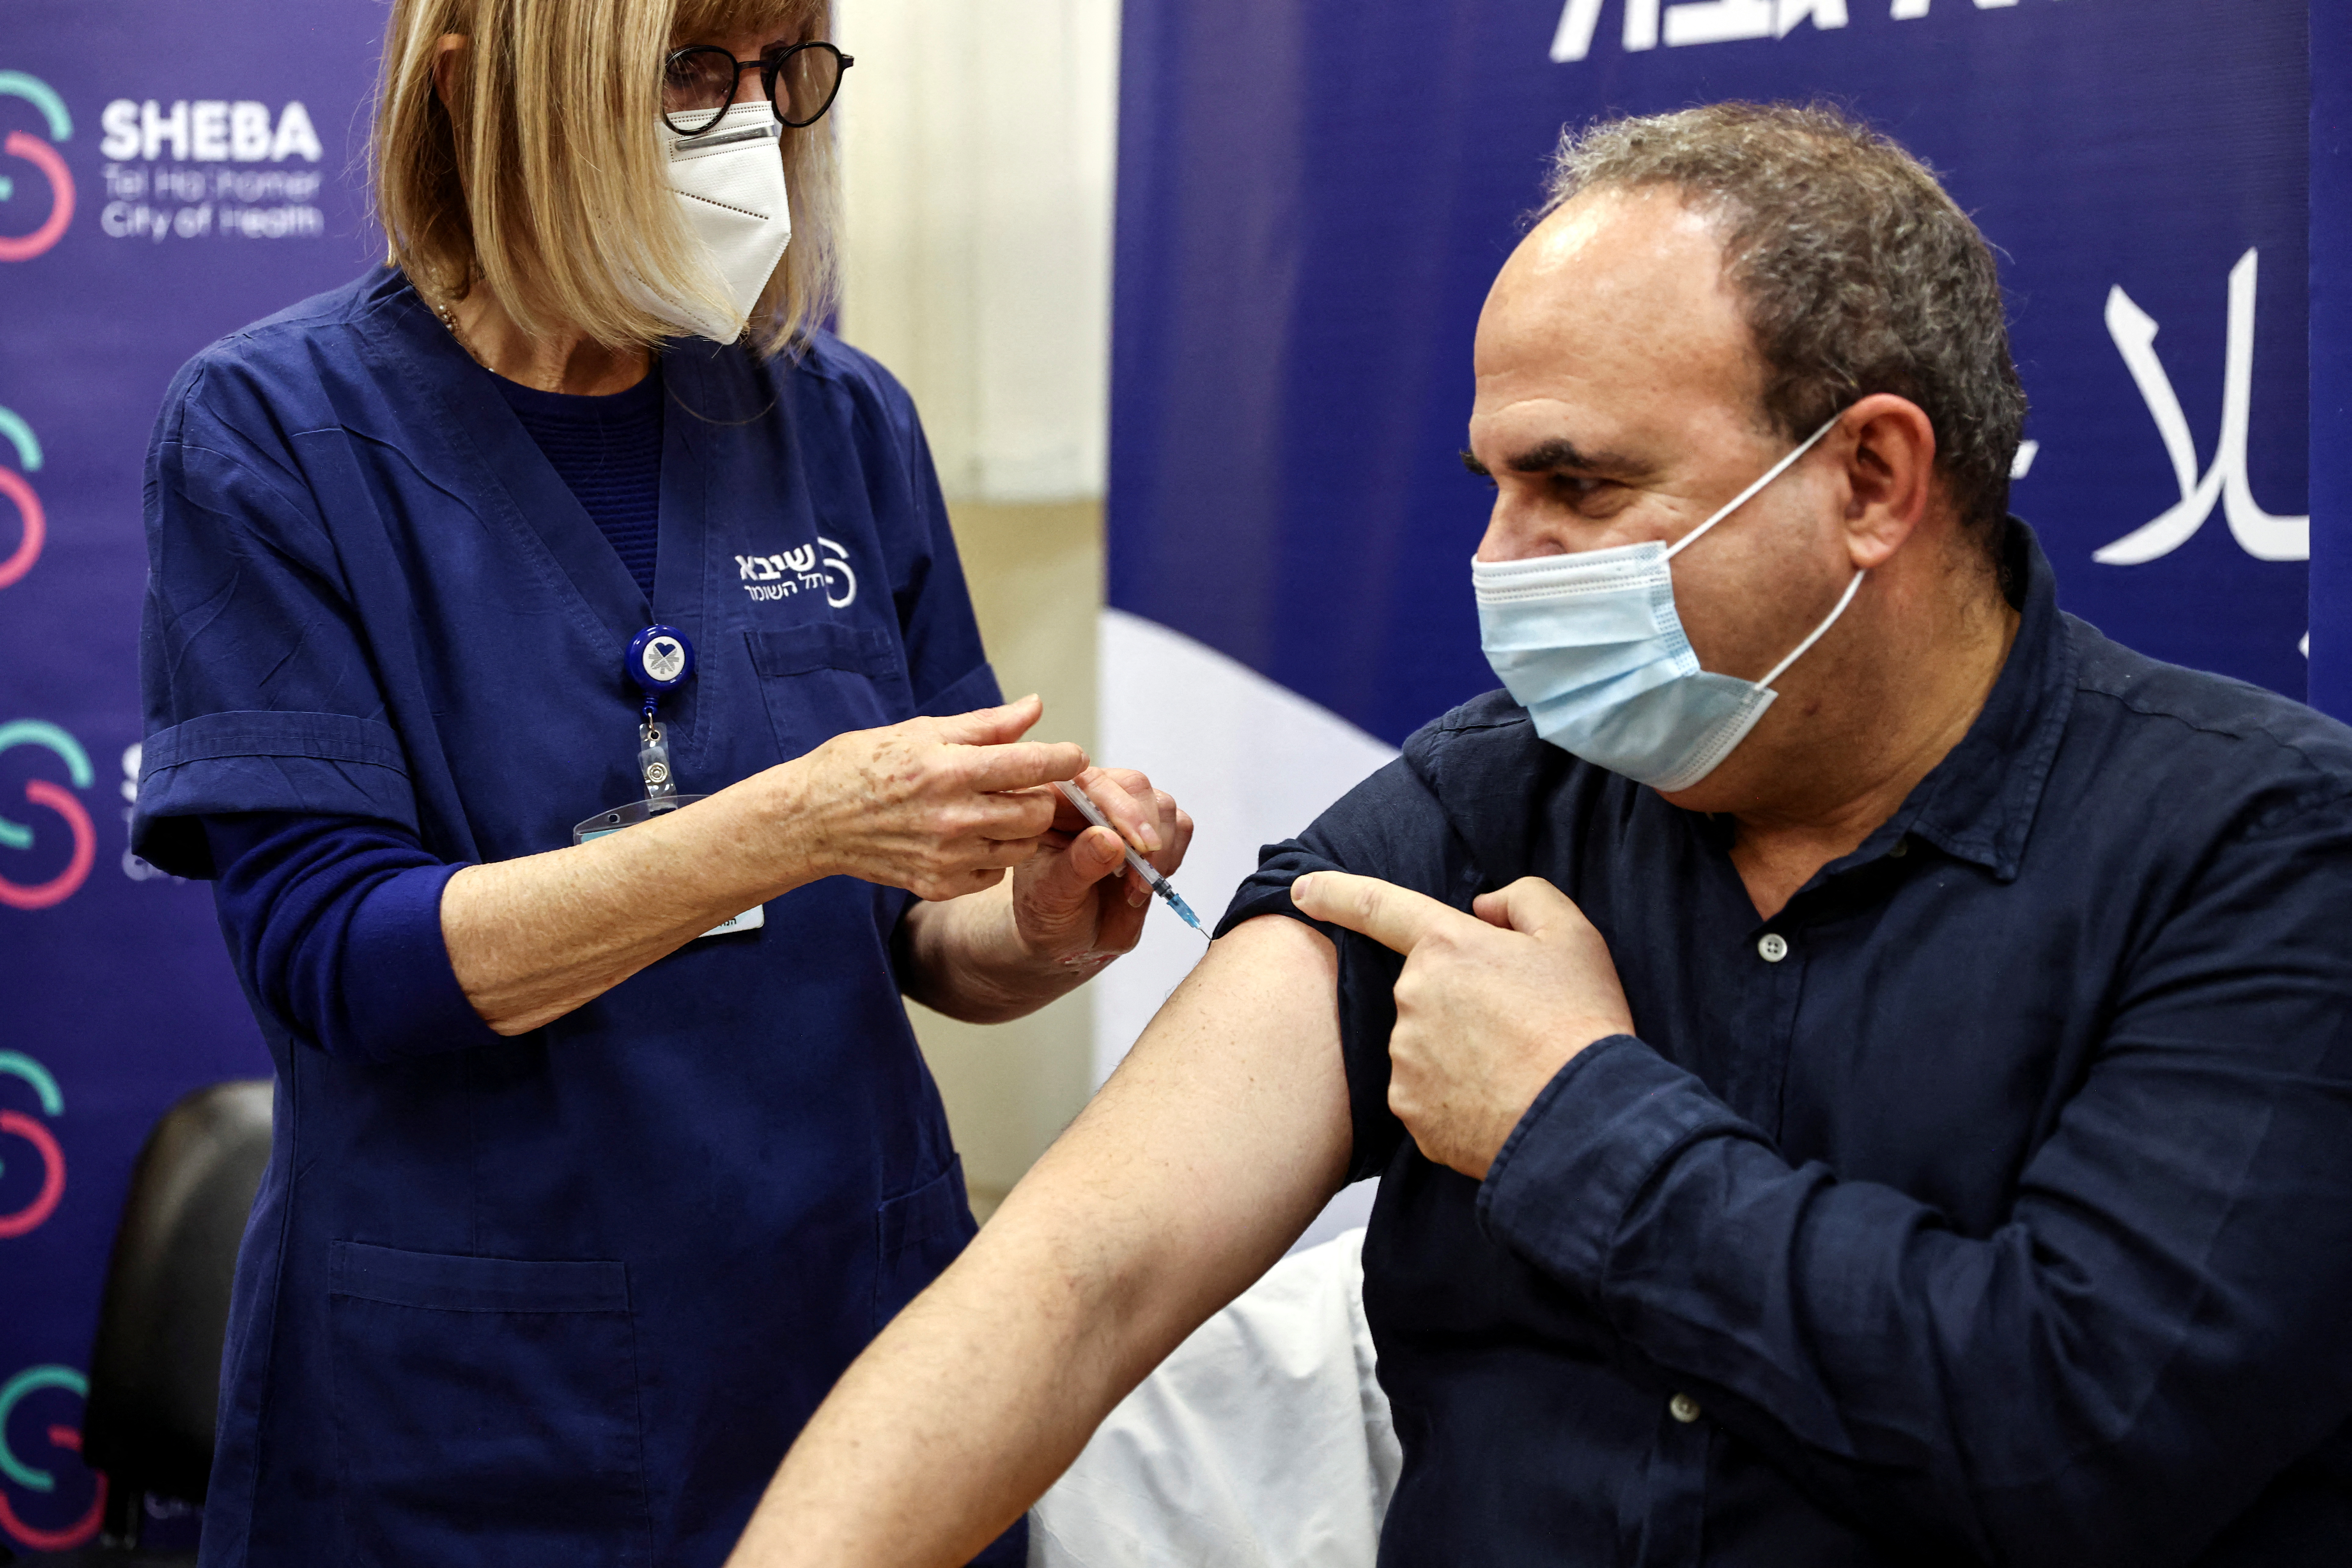 A man receives a fourth dose of coronavirus disease (COVID-19) vaccine as part of a trial in Israel, as Health Ministry is considering offering the second booster to the elderly and immunocompromised, at Sheba Medical Center in Ramat Gan